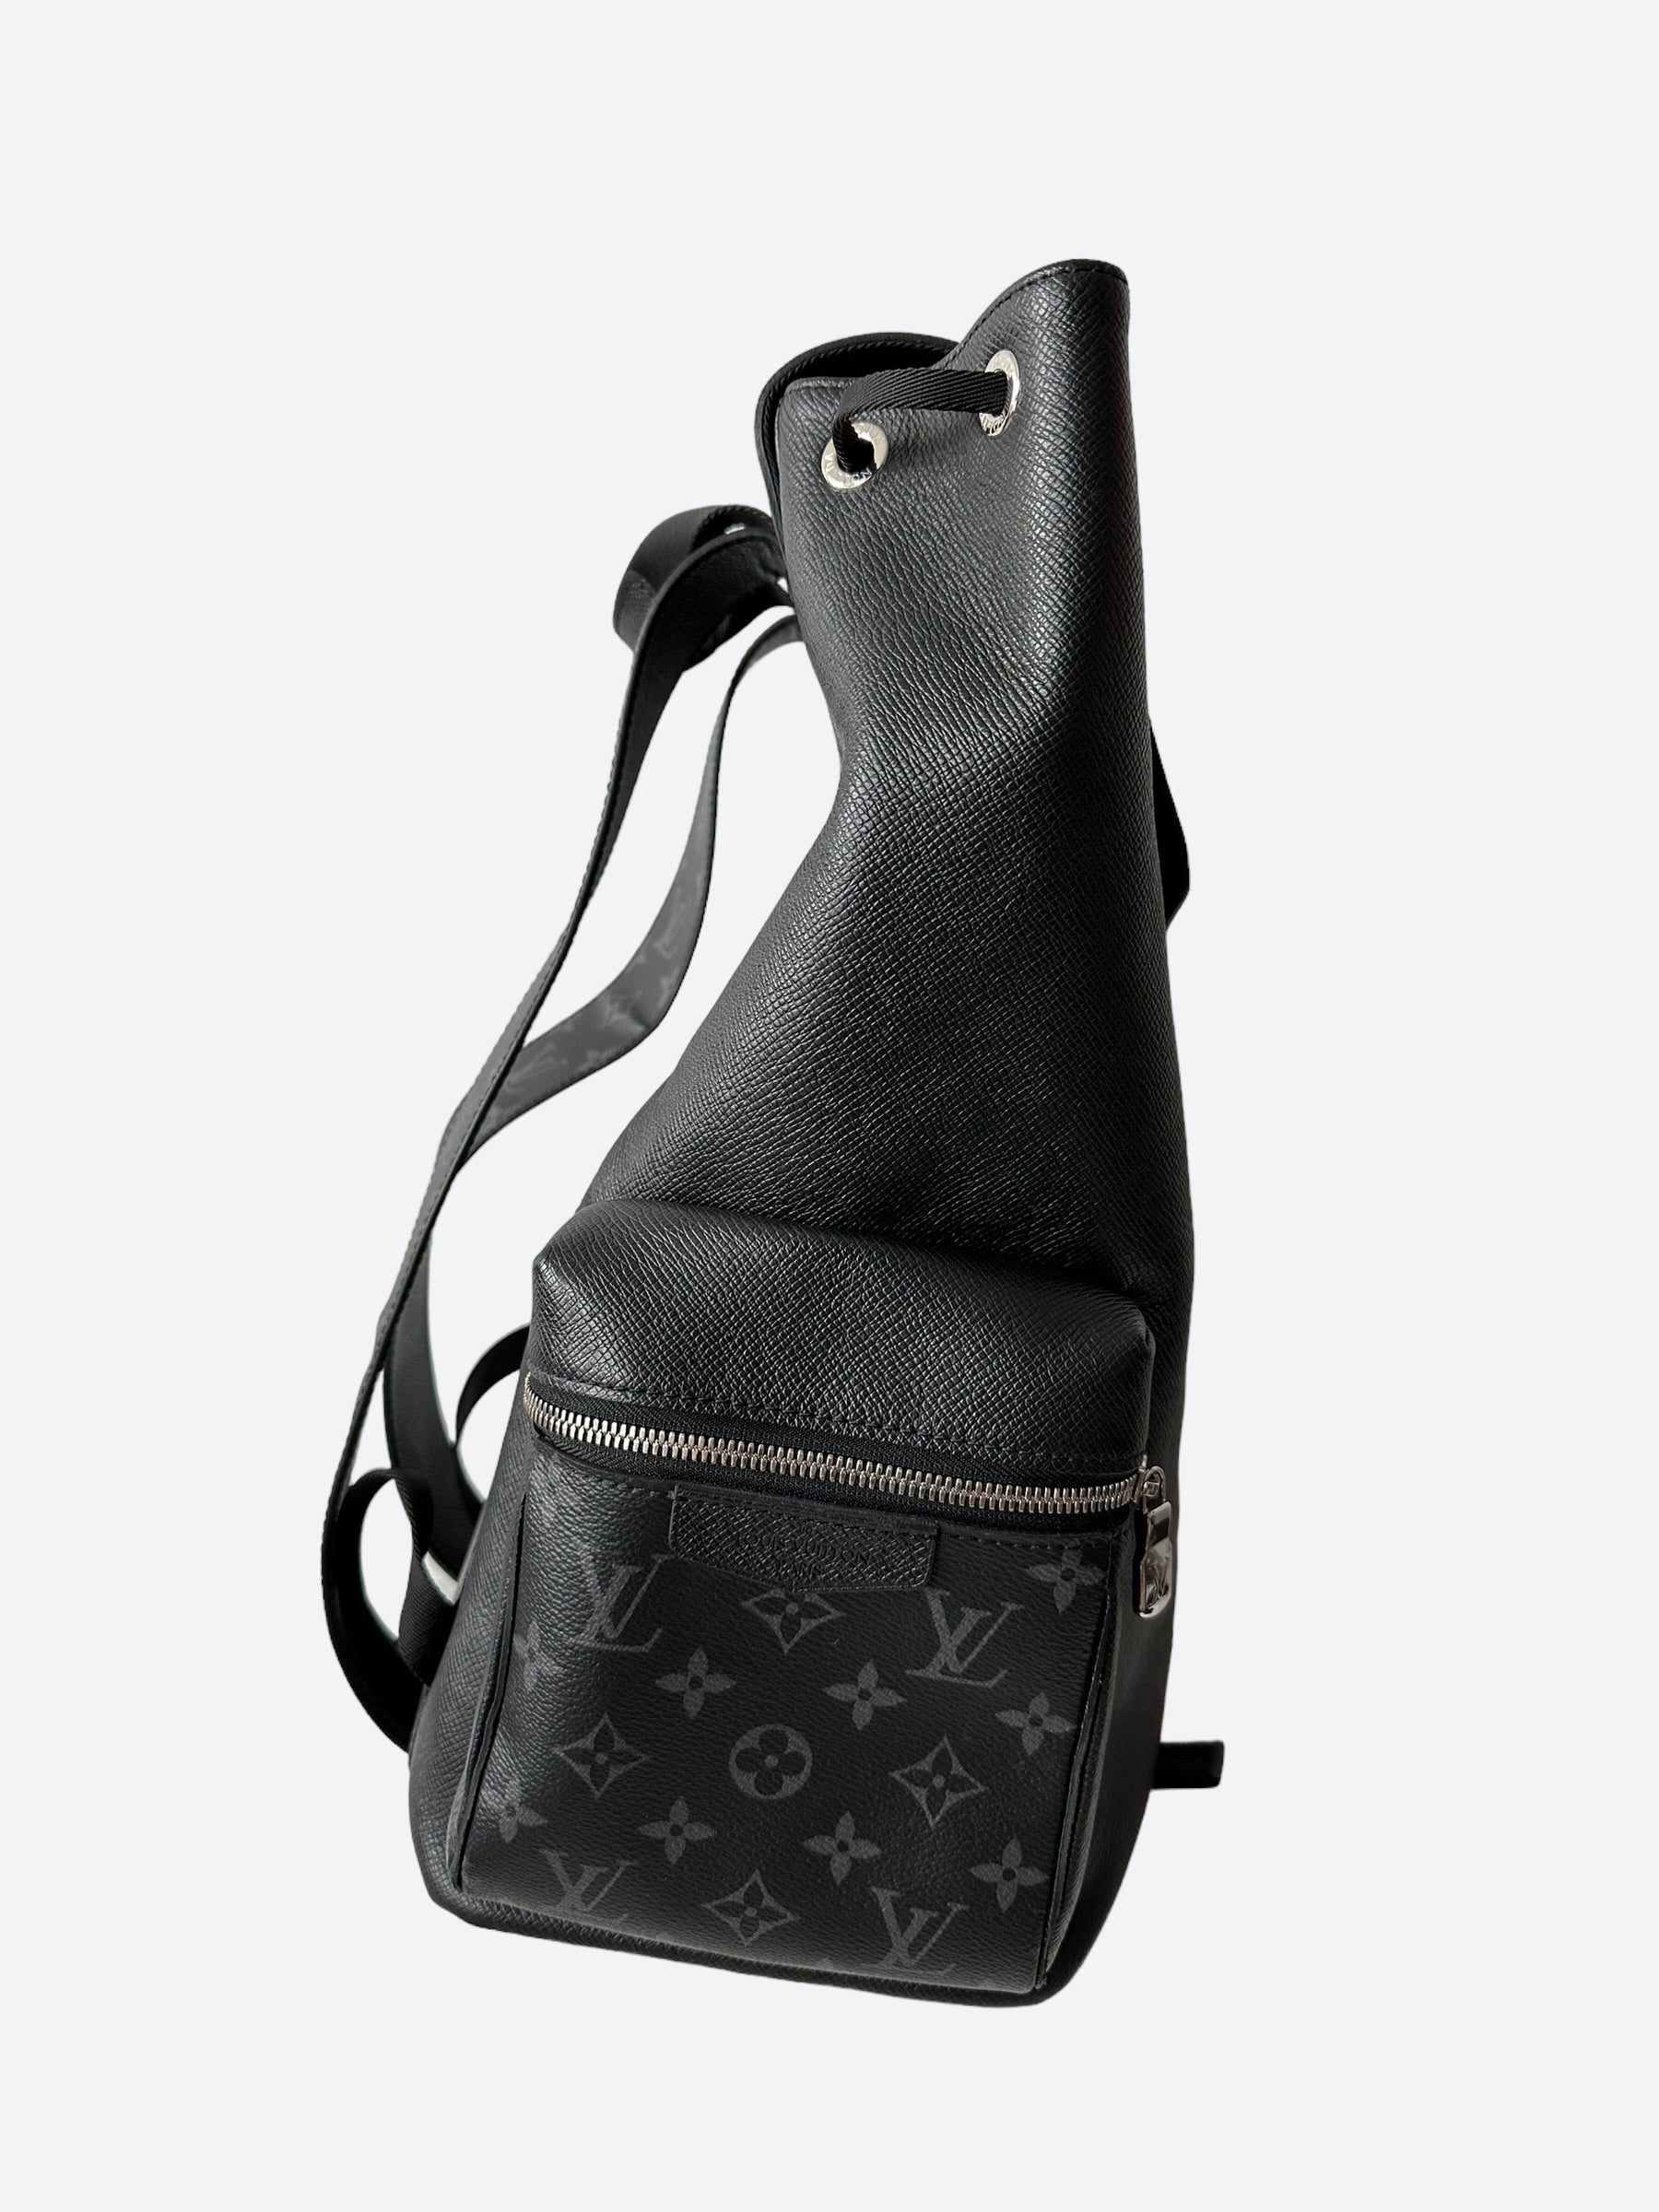 vuitton trio backpack